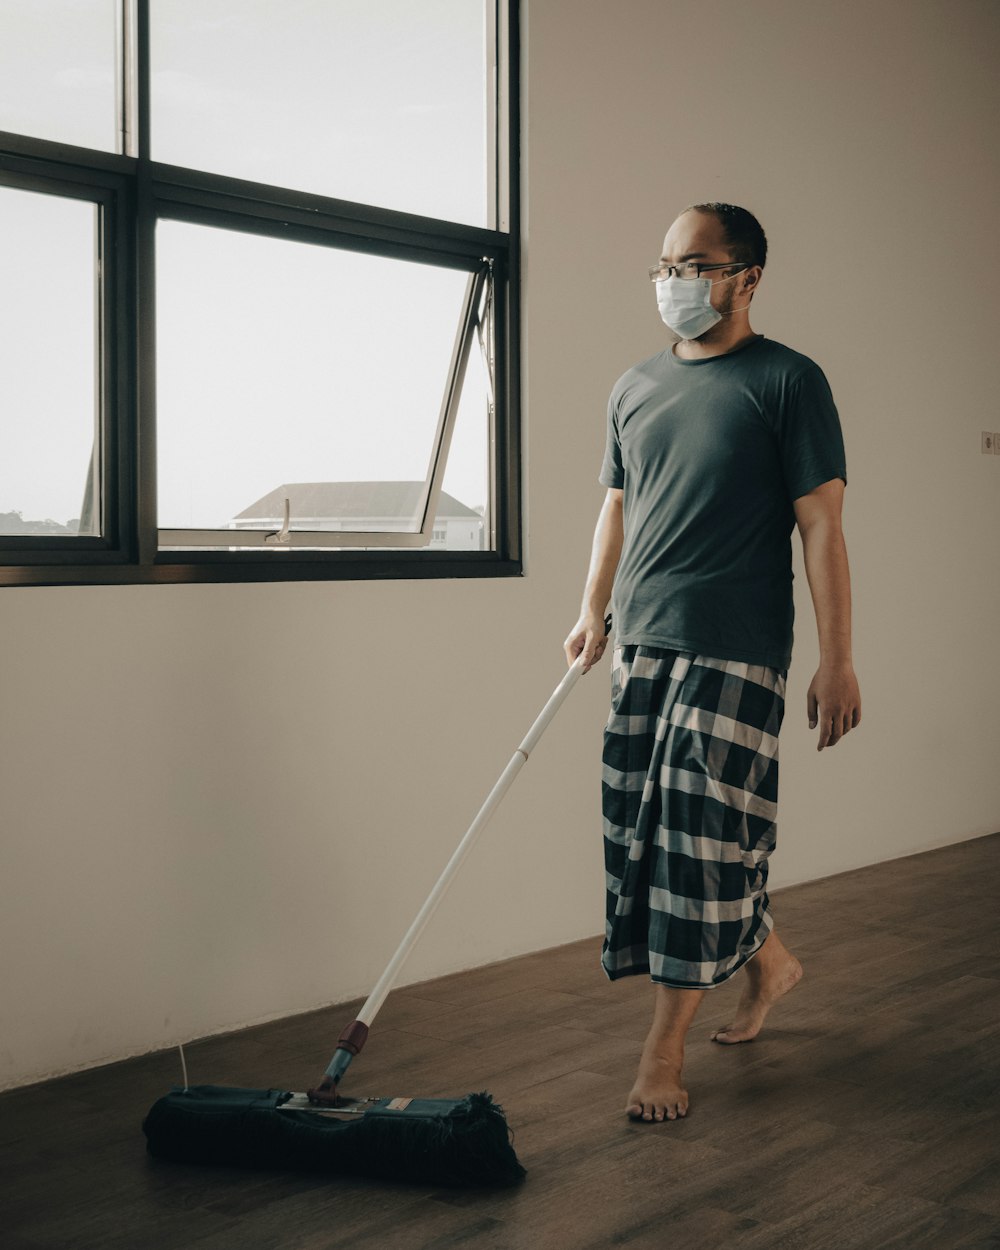 a man with a face mask is cleaning the floor